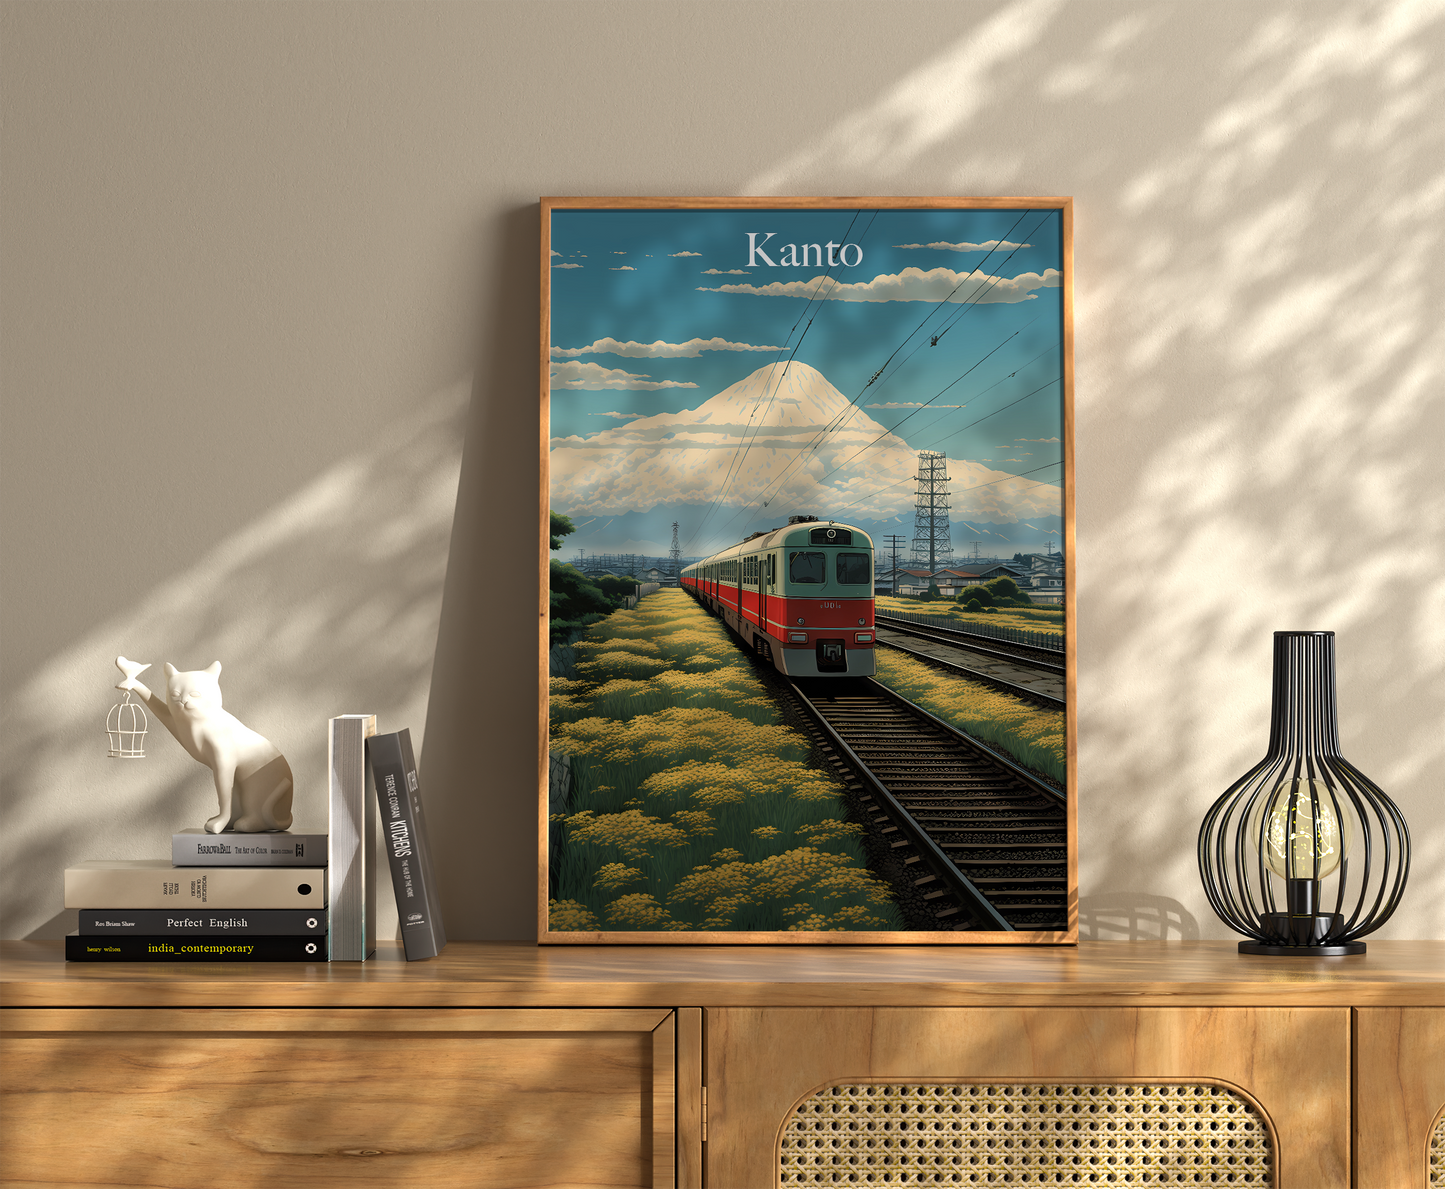 A vintage-style travel poster of Kanto featuring Mount Fuji and a train.